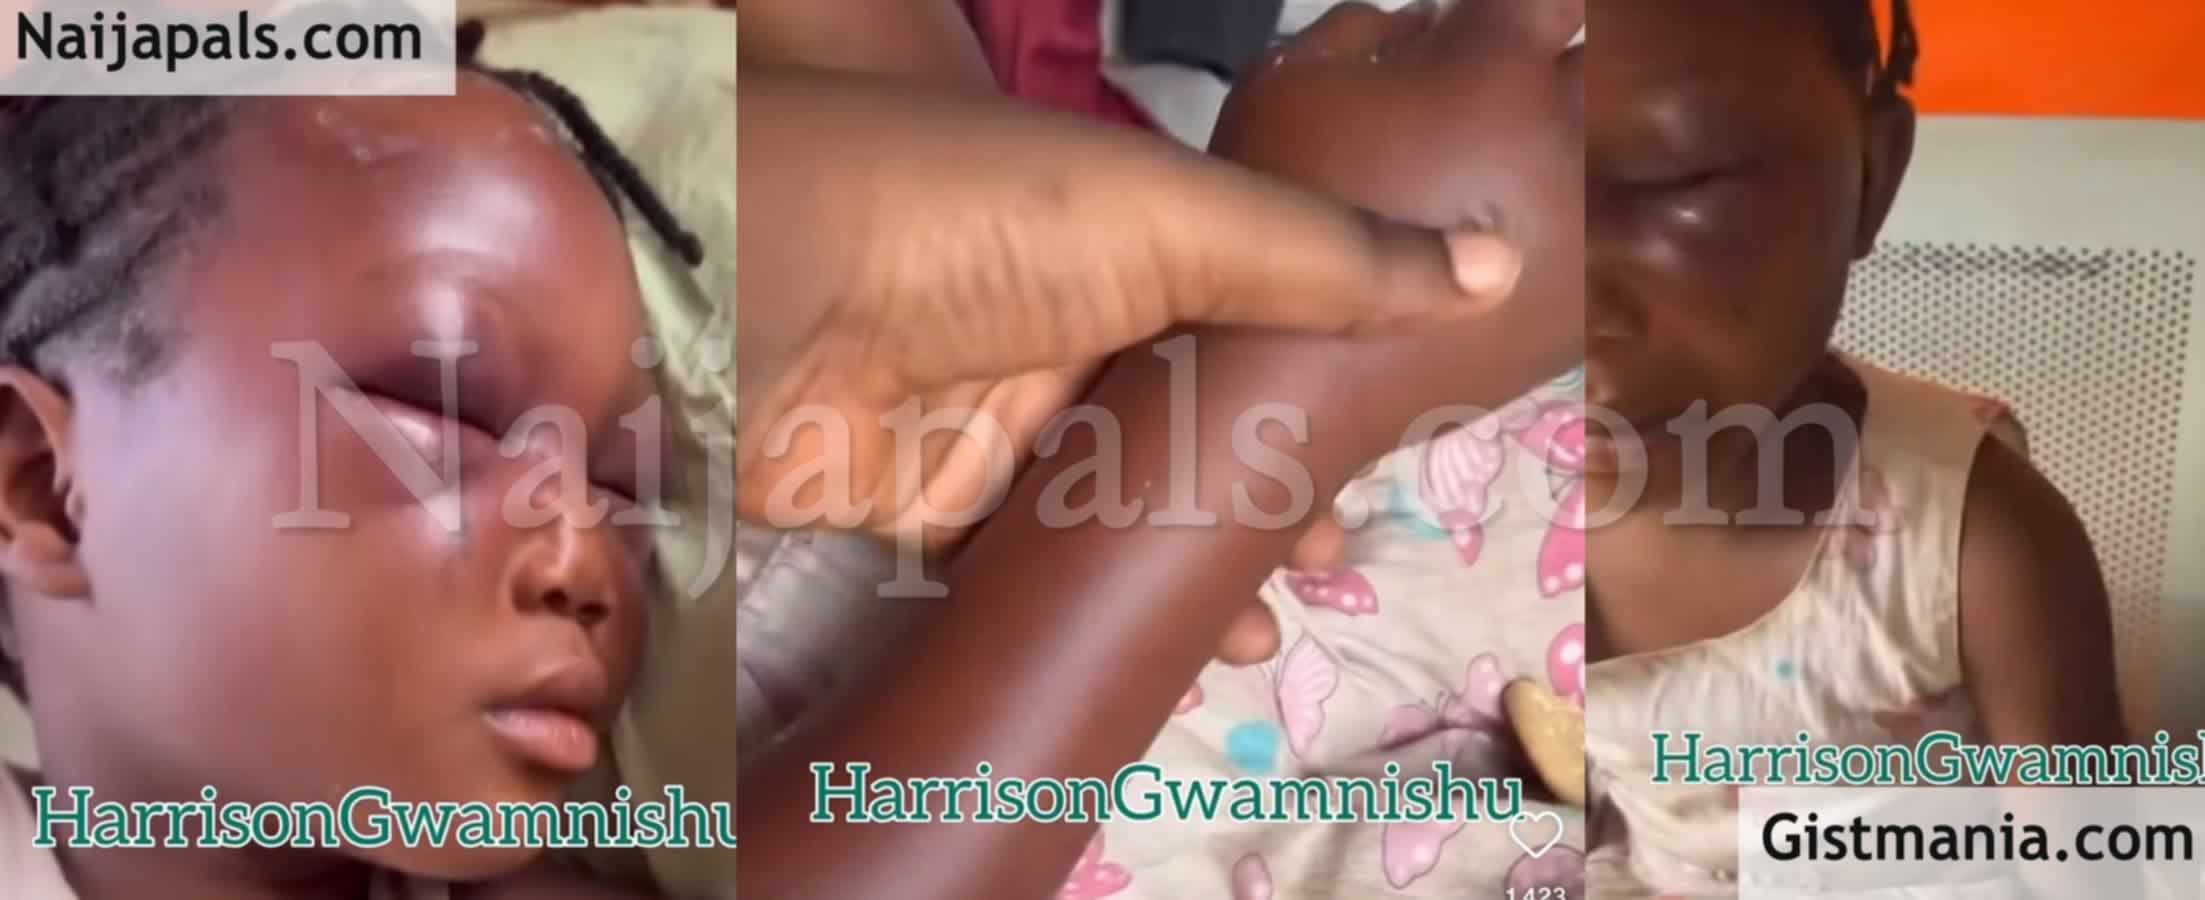 PHOTOS: 8 Years Old Girl Severely Assaulted and Left Almost Blinded by Her Aunt in Lagos